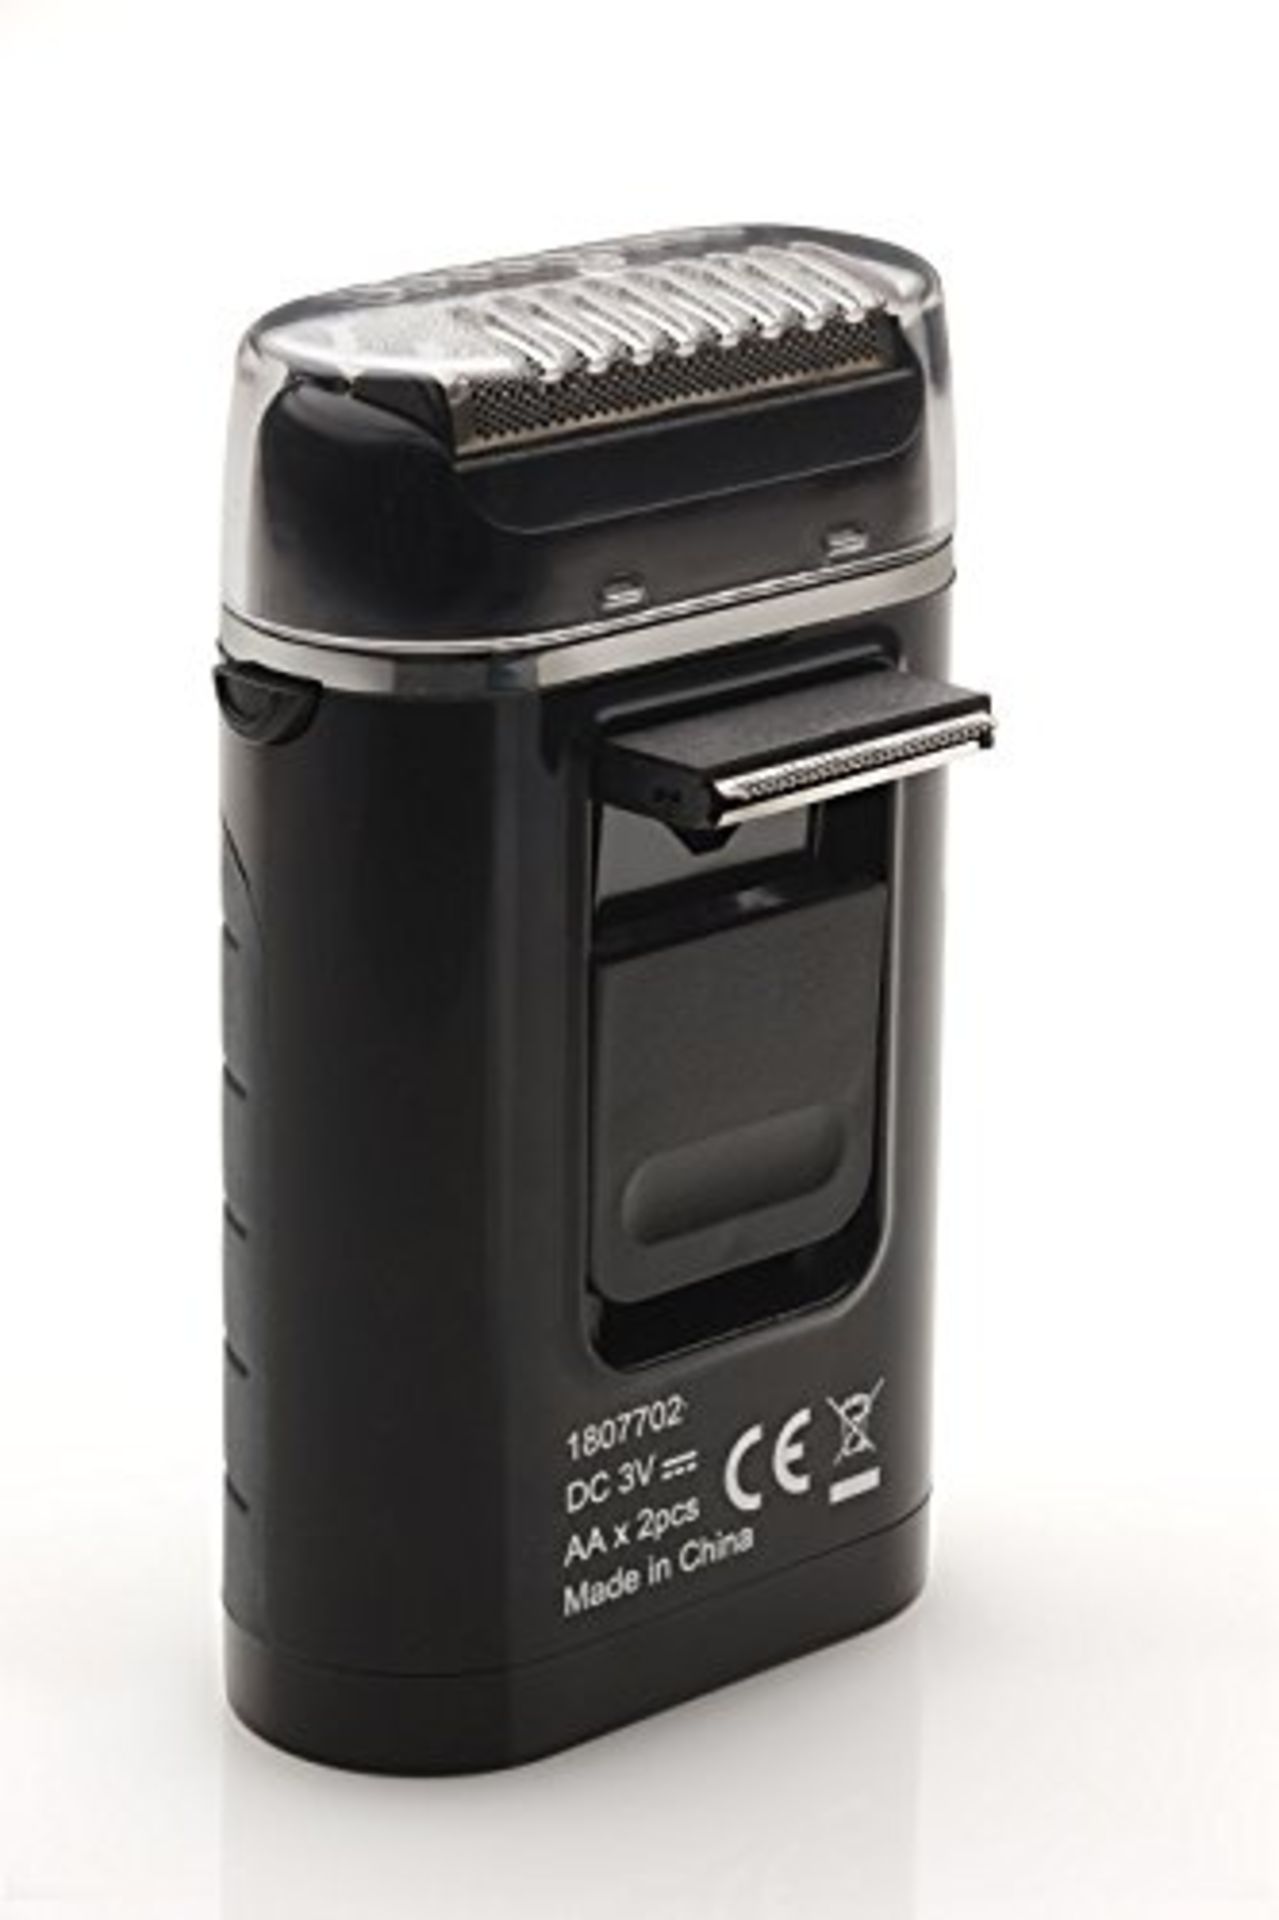 V Brand New Carrera Electric Gents Shaver - Ebay Price £14.95 X 2 YOUR BID PRICE TO BE MULTIPLIED BY